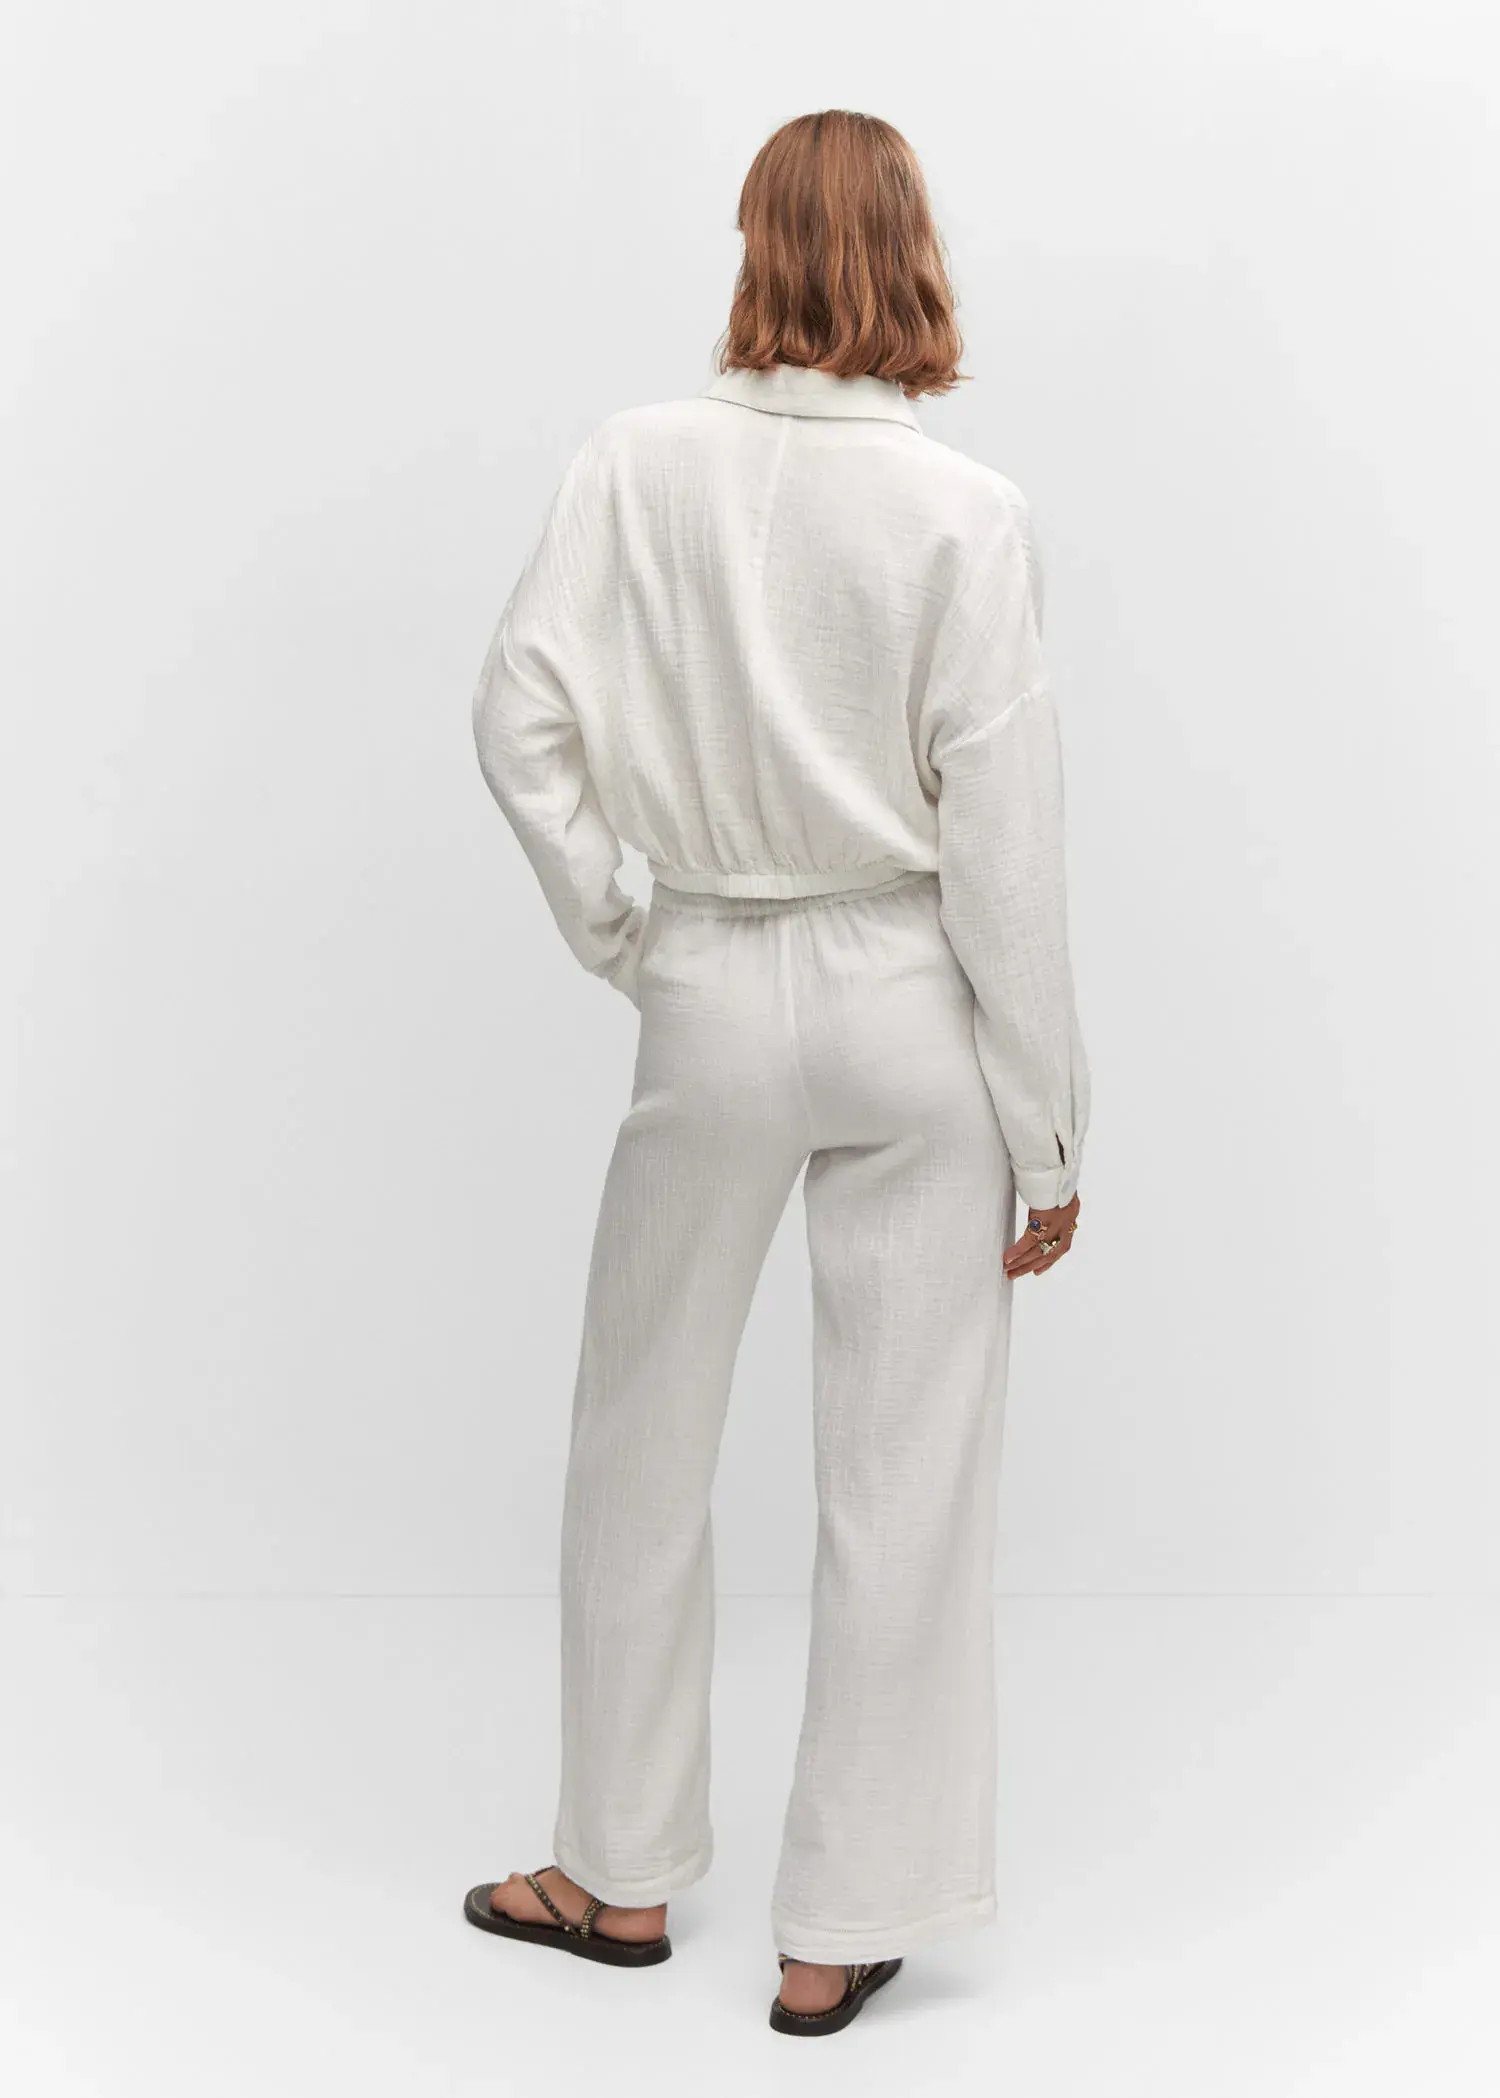 Mango Bow textured pants. a person wearing a white outfit standing in front of a wall. 